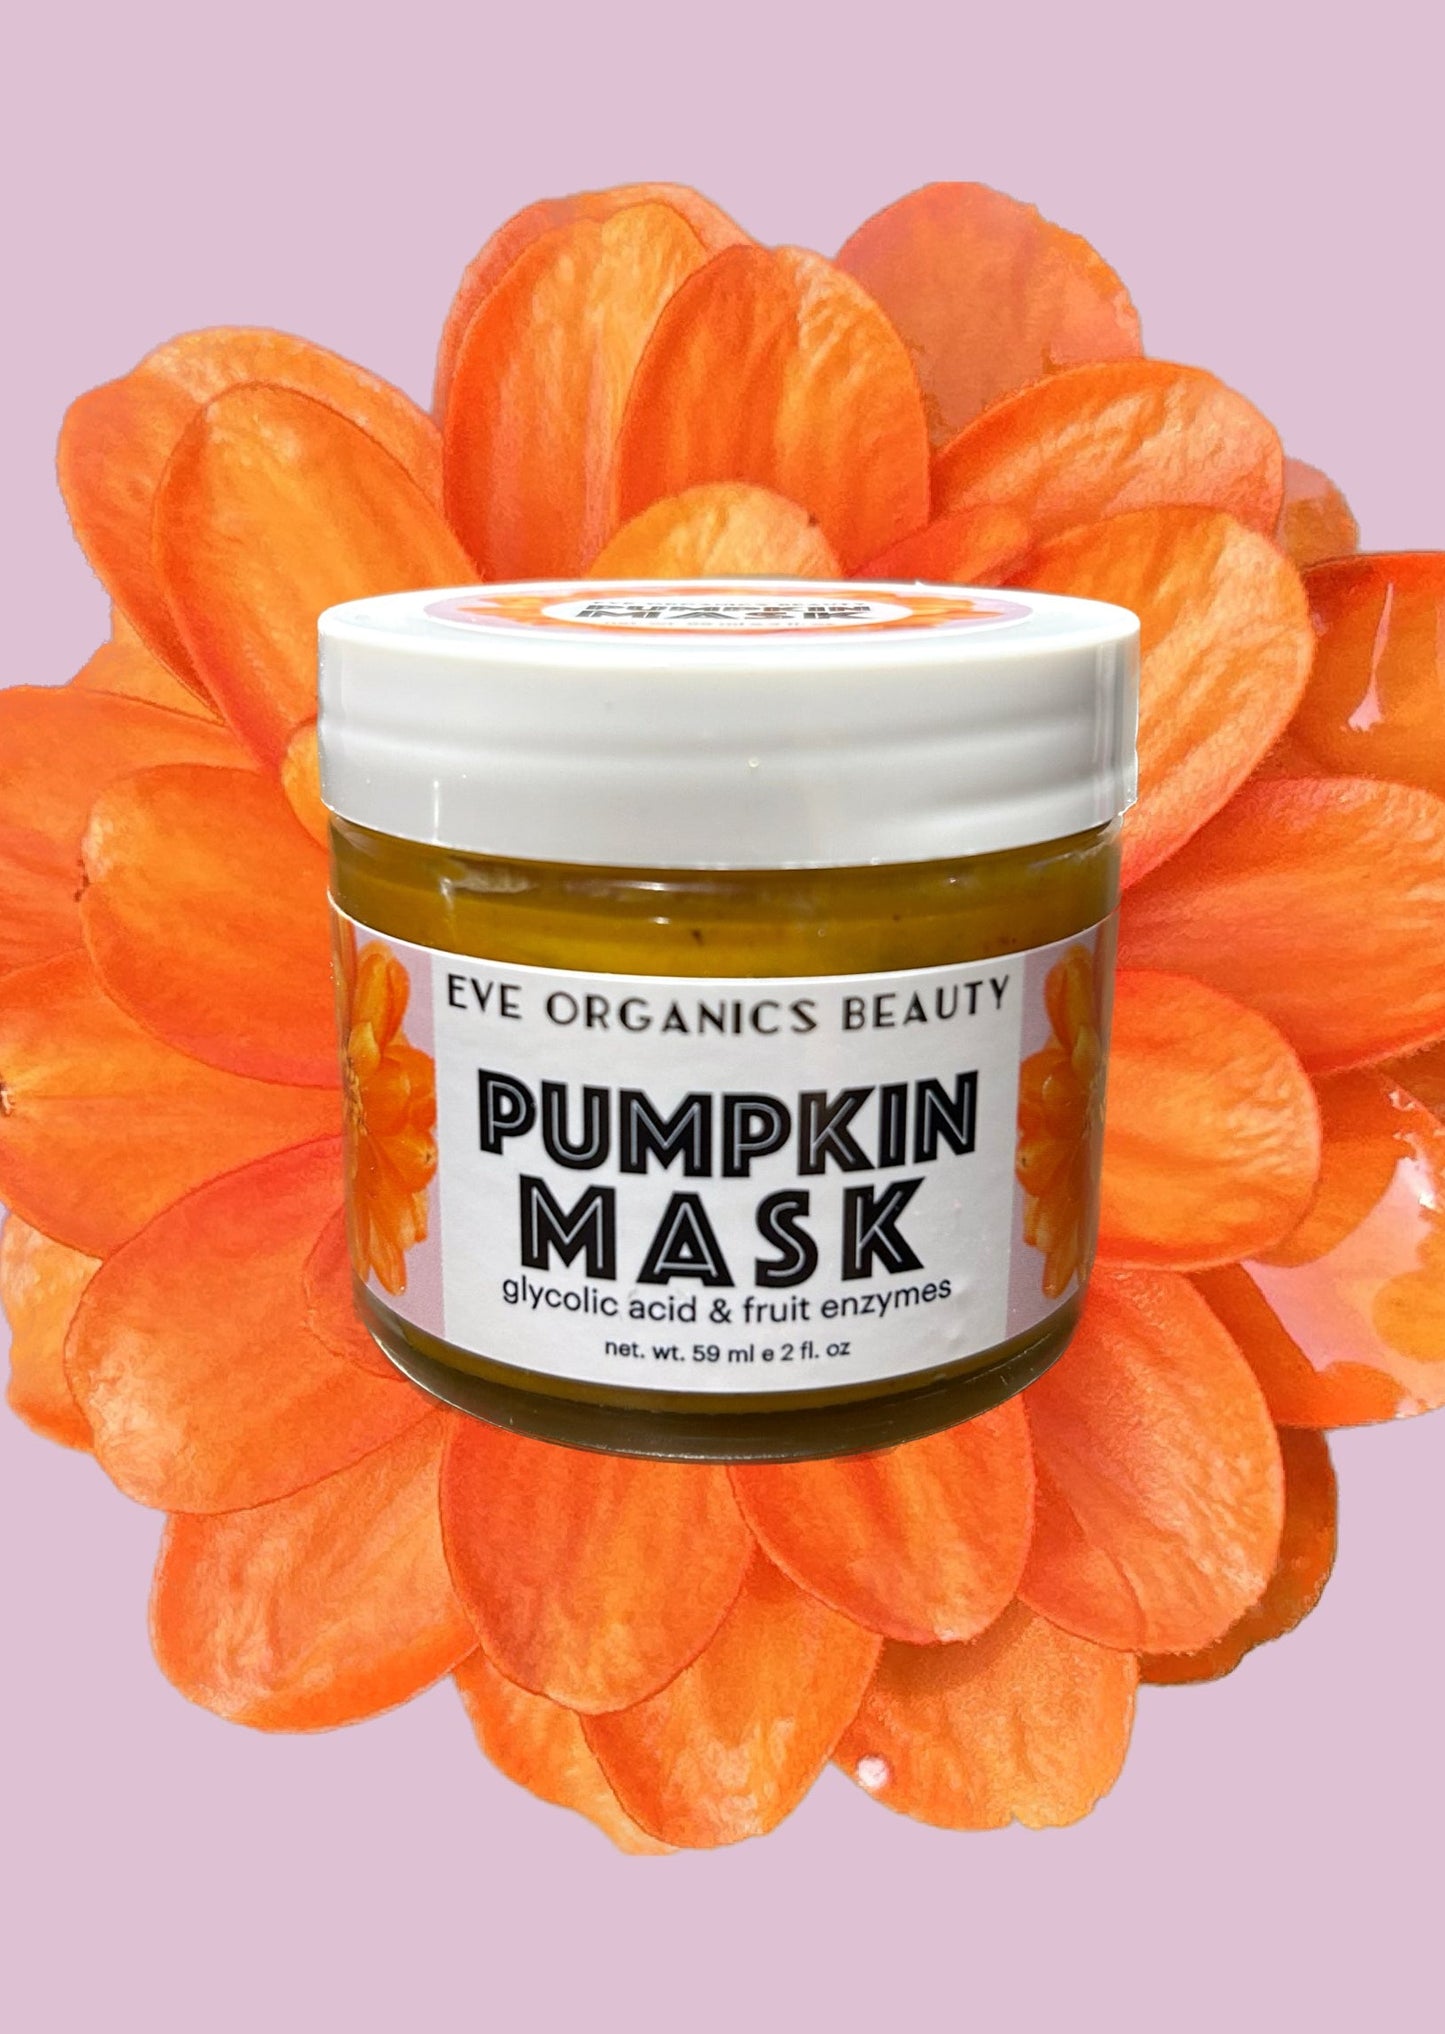 PUMPKIN ENZYME MASK WITH GLYCOLIC ACID & FRUIT ENZYMES